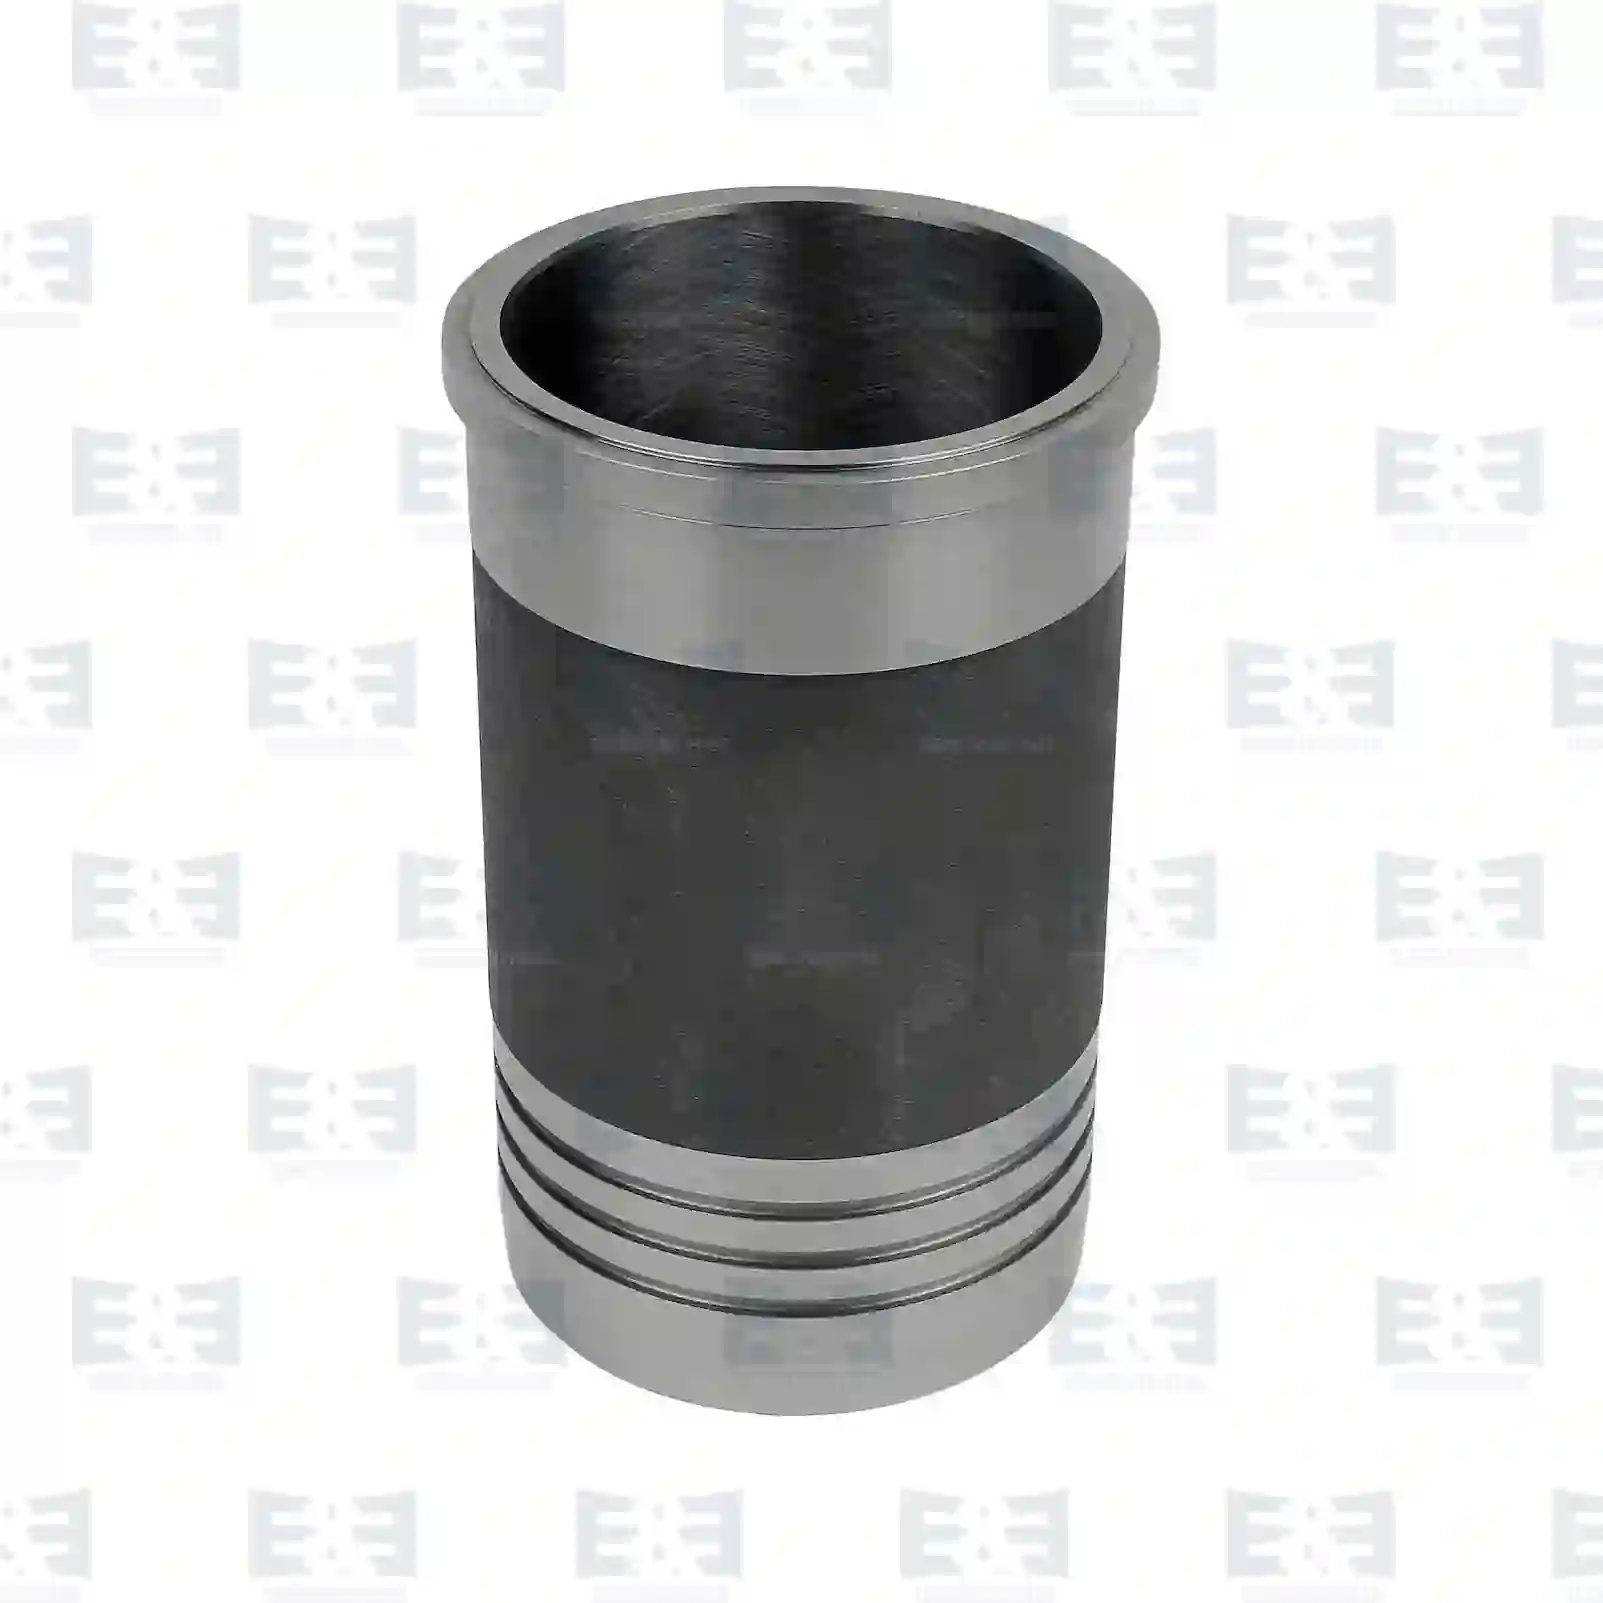 Cylinder liner, without seal rings, 2E2208313, 500054921, 500338224, , ||  2E2208313 E&E Truck Spare Parts | Truck Spare Parts, Auotomotive Spare Parts Cylinder liner, without seal rings, 2E2208313, 500054921, 500338224, , ||  2E2208313 E&E Truck Spare Parts | Truck Spare Parts, Auotomotive Spare Parts